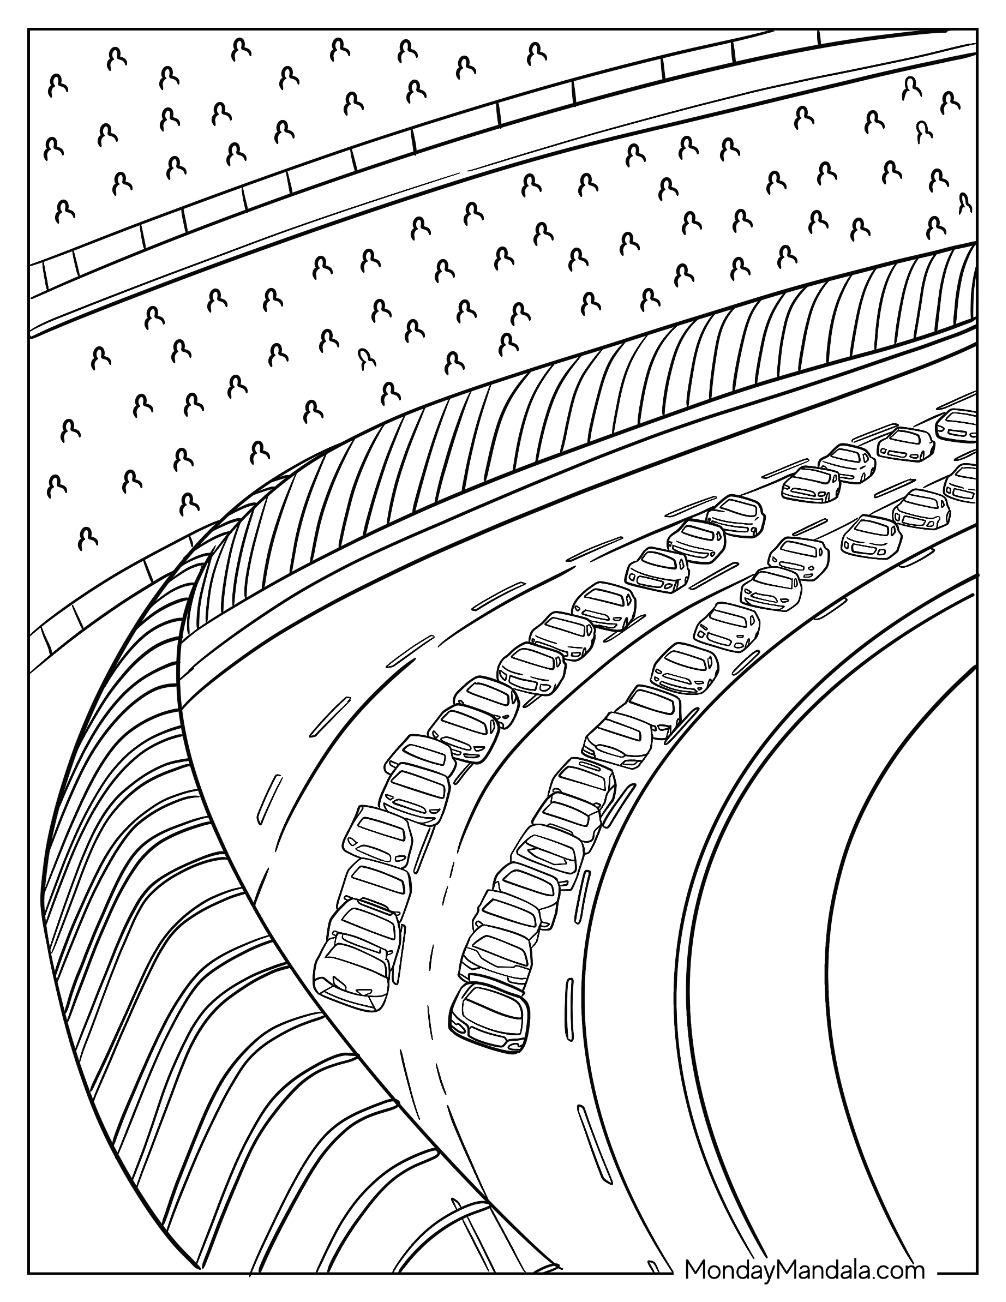 Nascar coloring pages free pdf printables